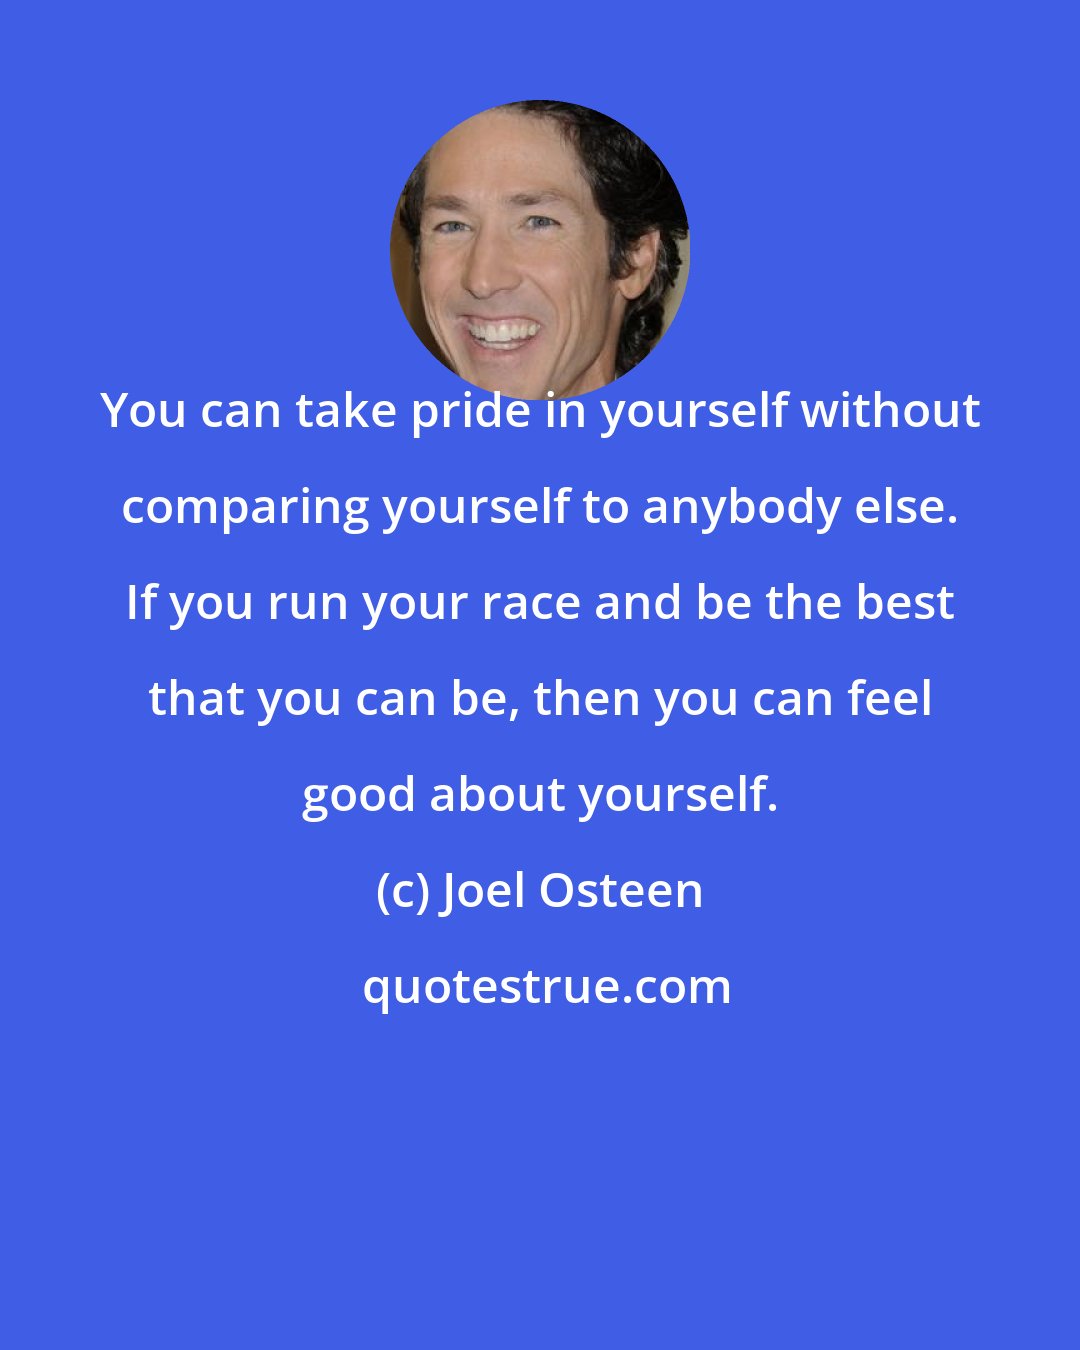 Joel Osteen: You can take pride in yourself without comparing yourself to anybody else. If you run your race and be the best that you can be, then you can feel good about yourself.